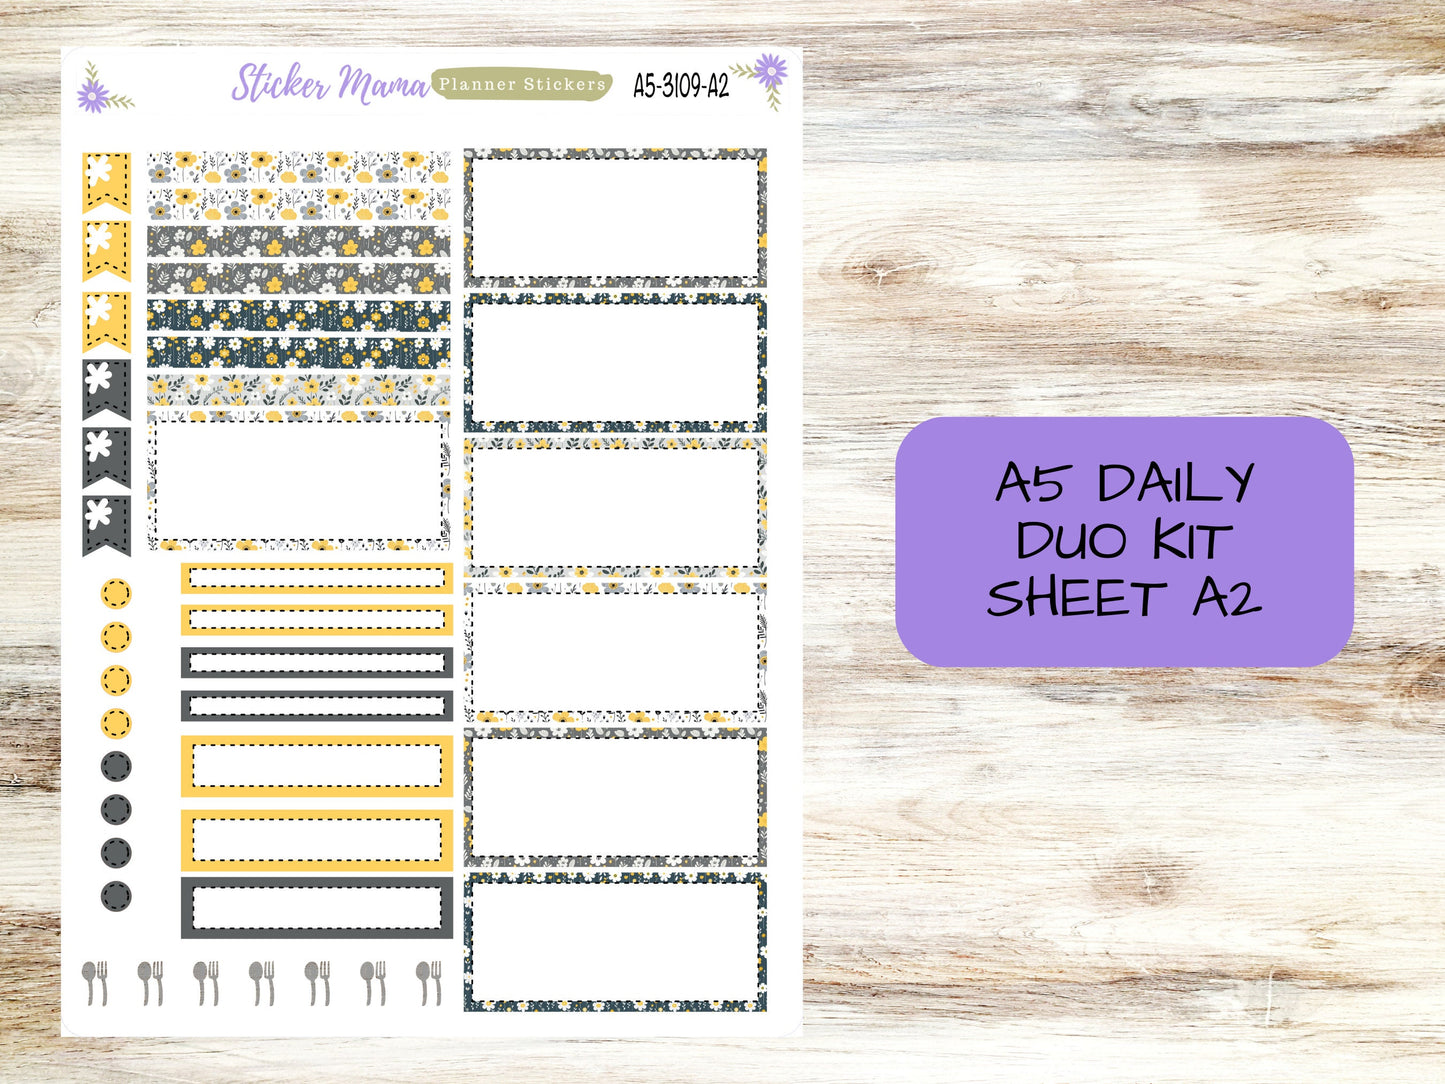 A5-DAILY DUO-Kit #3109 || Grey and Yellow Floral  || Planner Stickers - Daily Duo A5 Planner - Daily Duo Stickers - Daily Planner